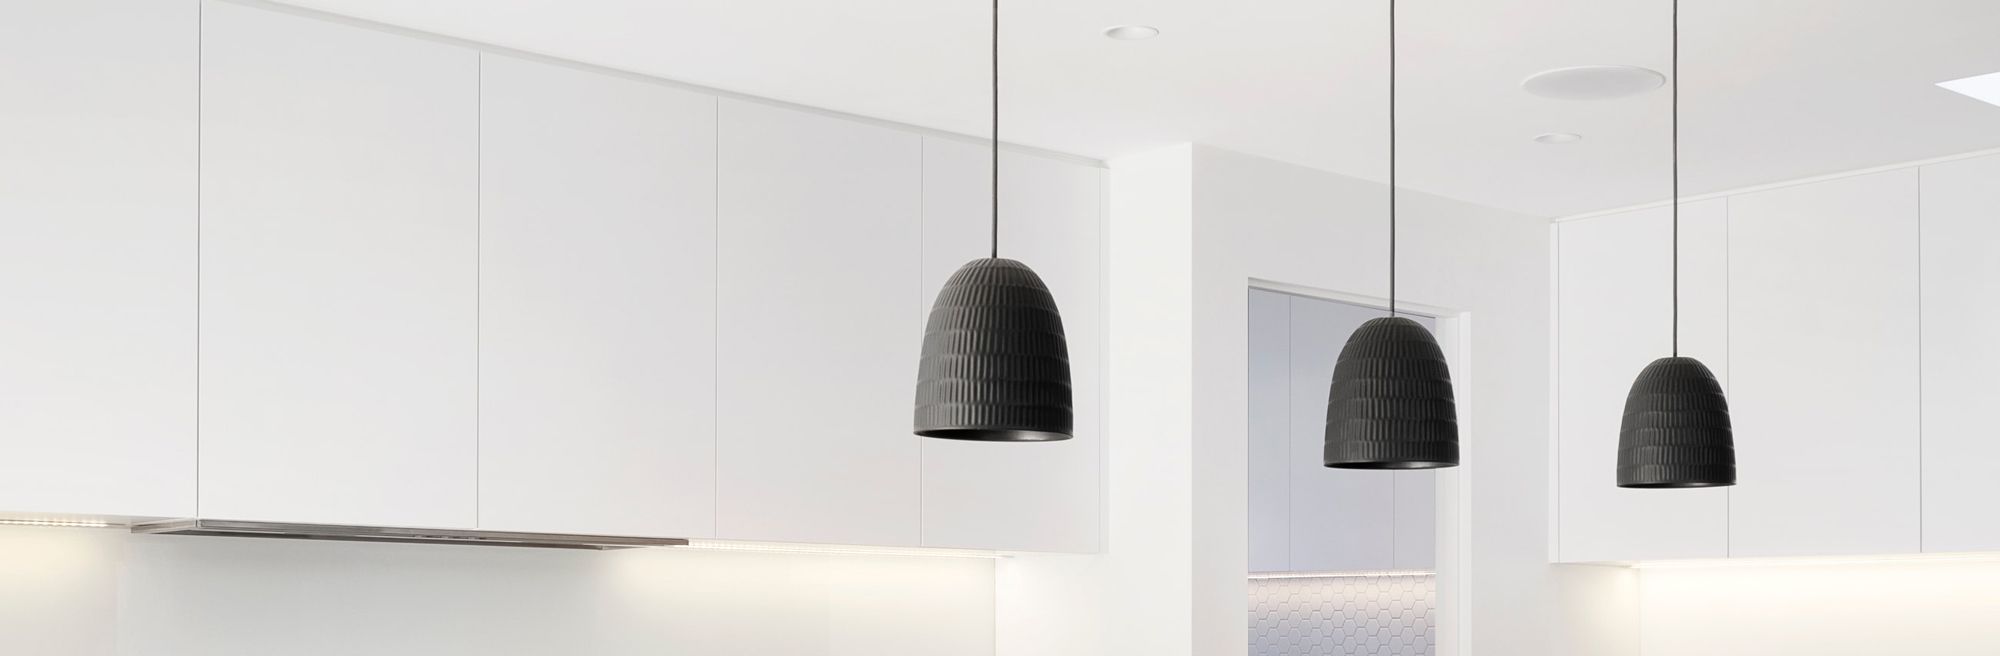 black pendants hanging in a kitchen setting